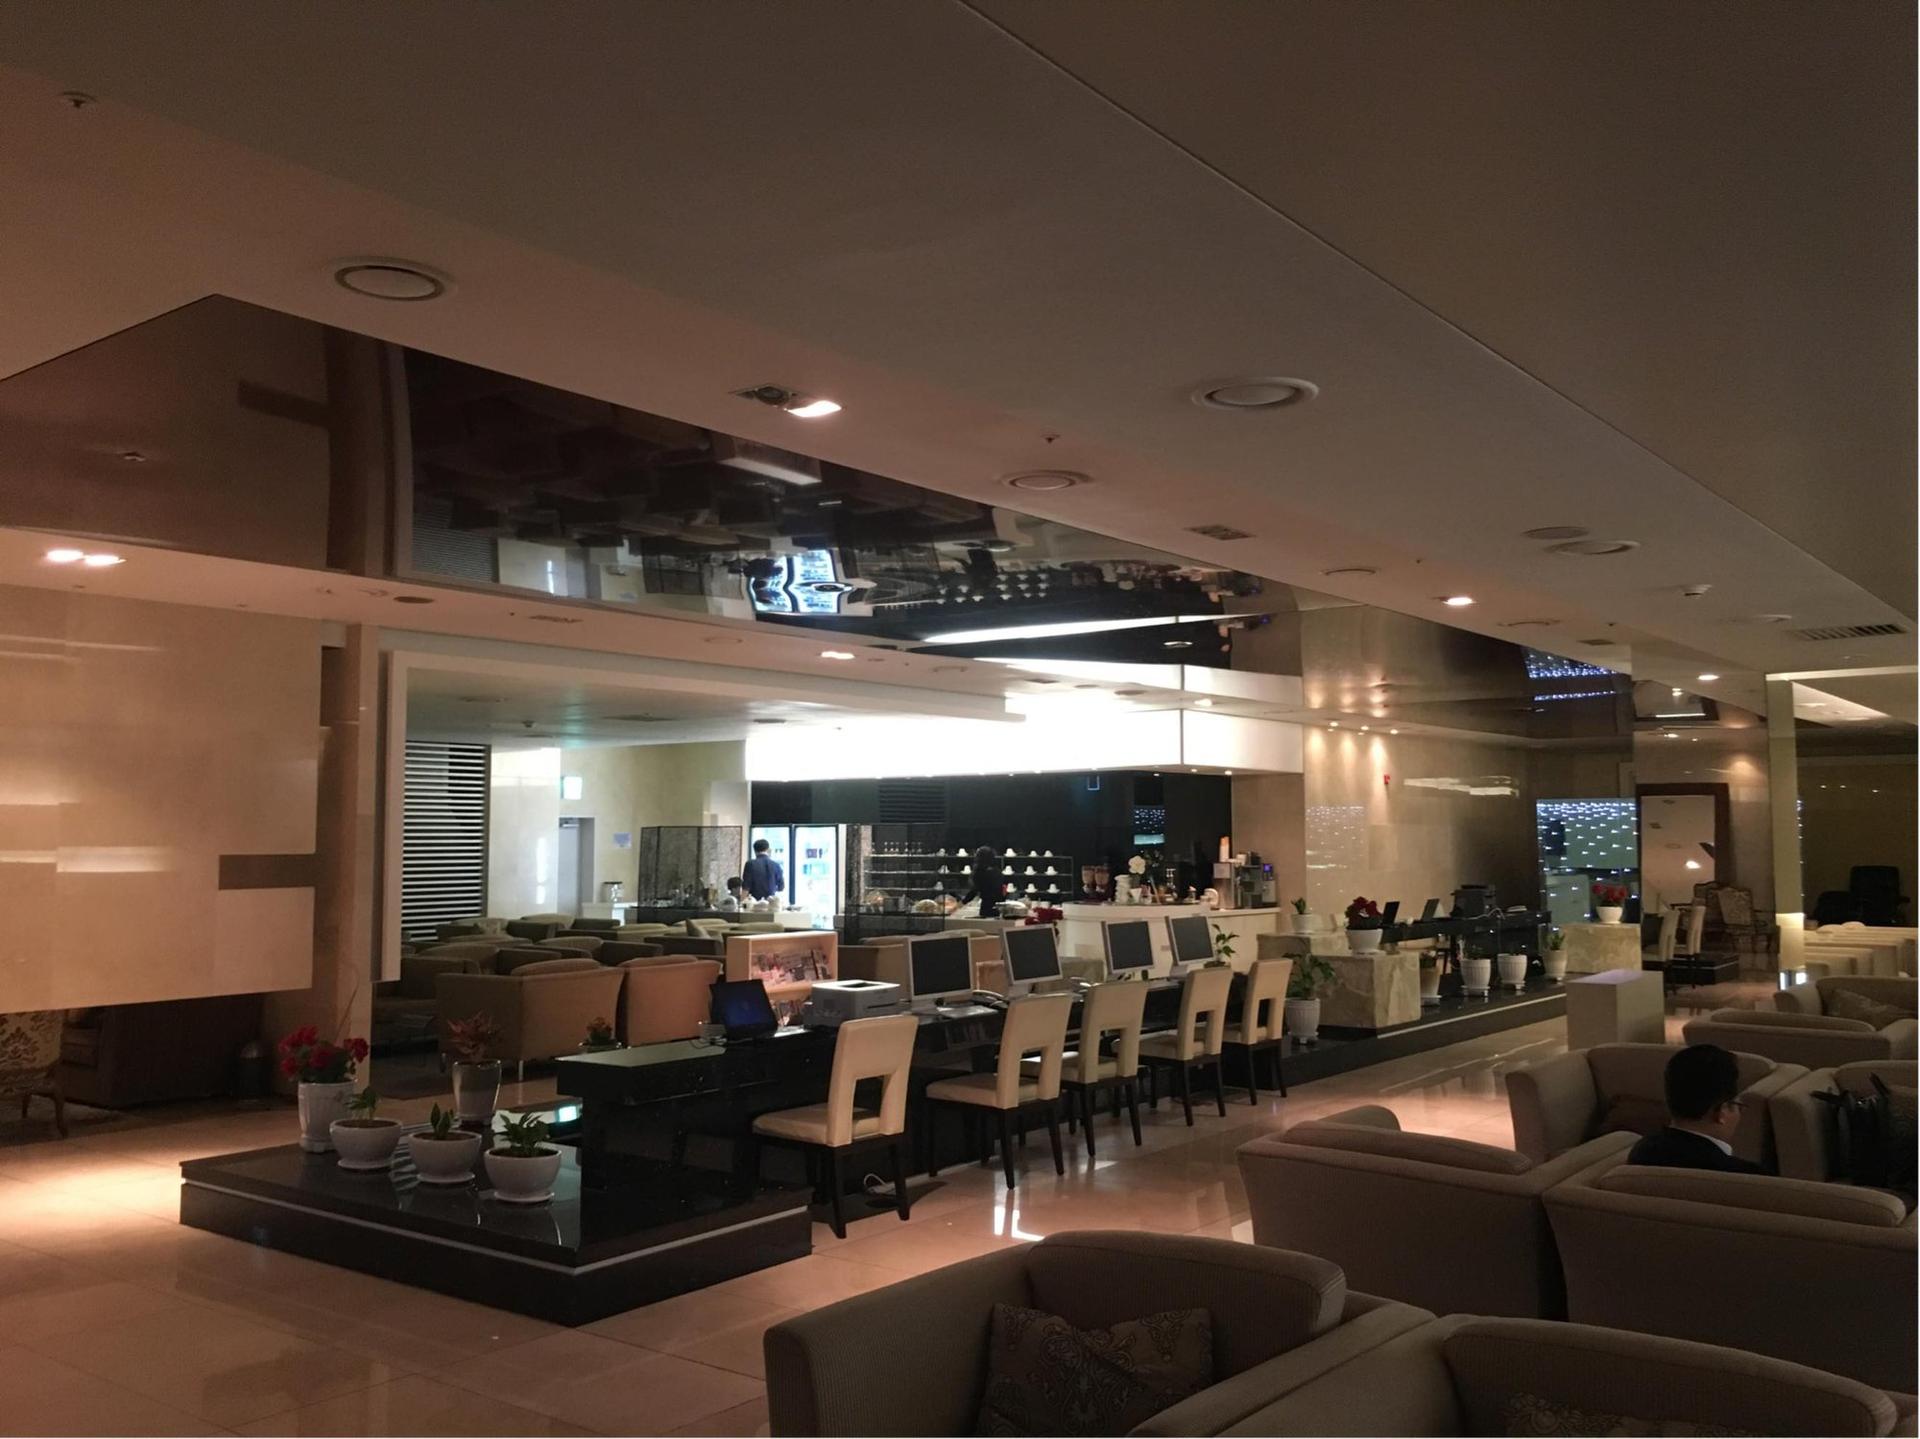 China Eastern/Shanghai Airlines VIP Lounge image 2 of 3